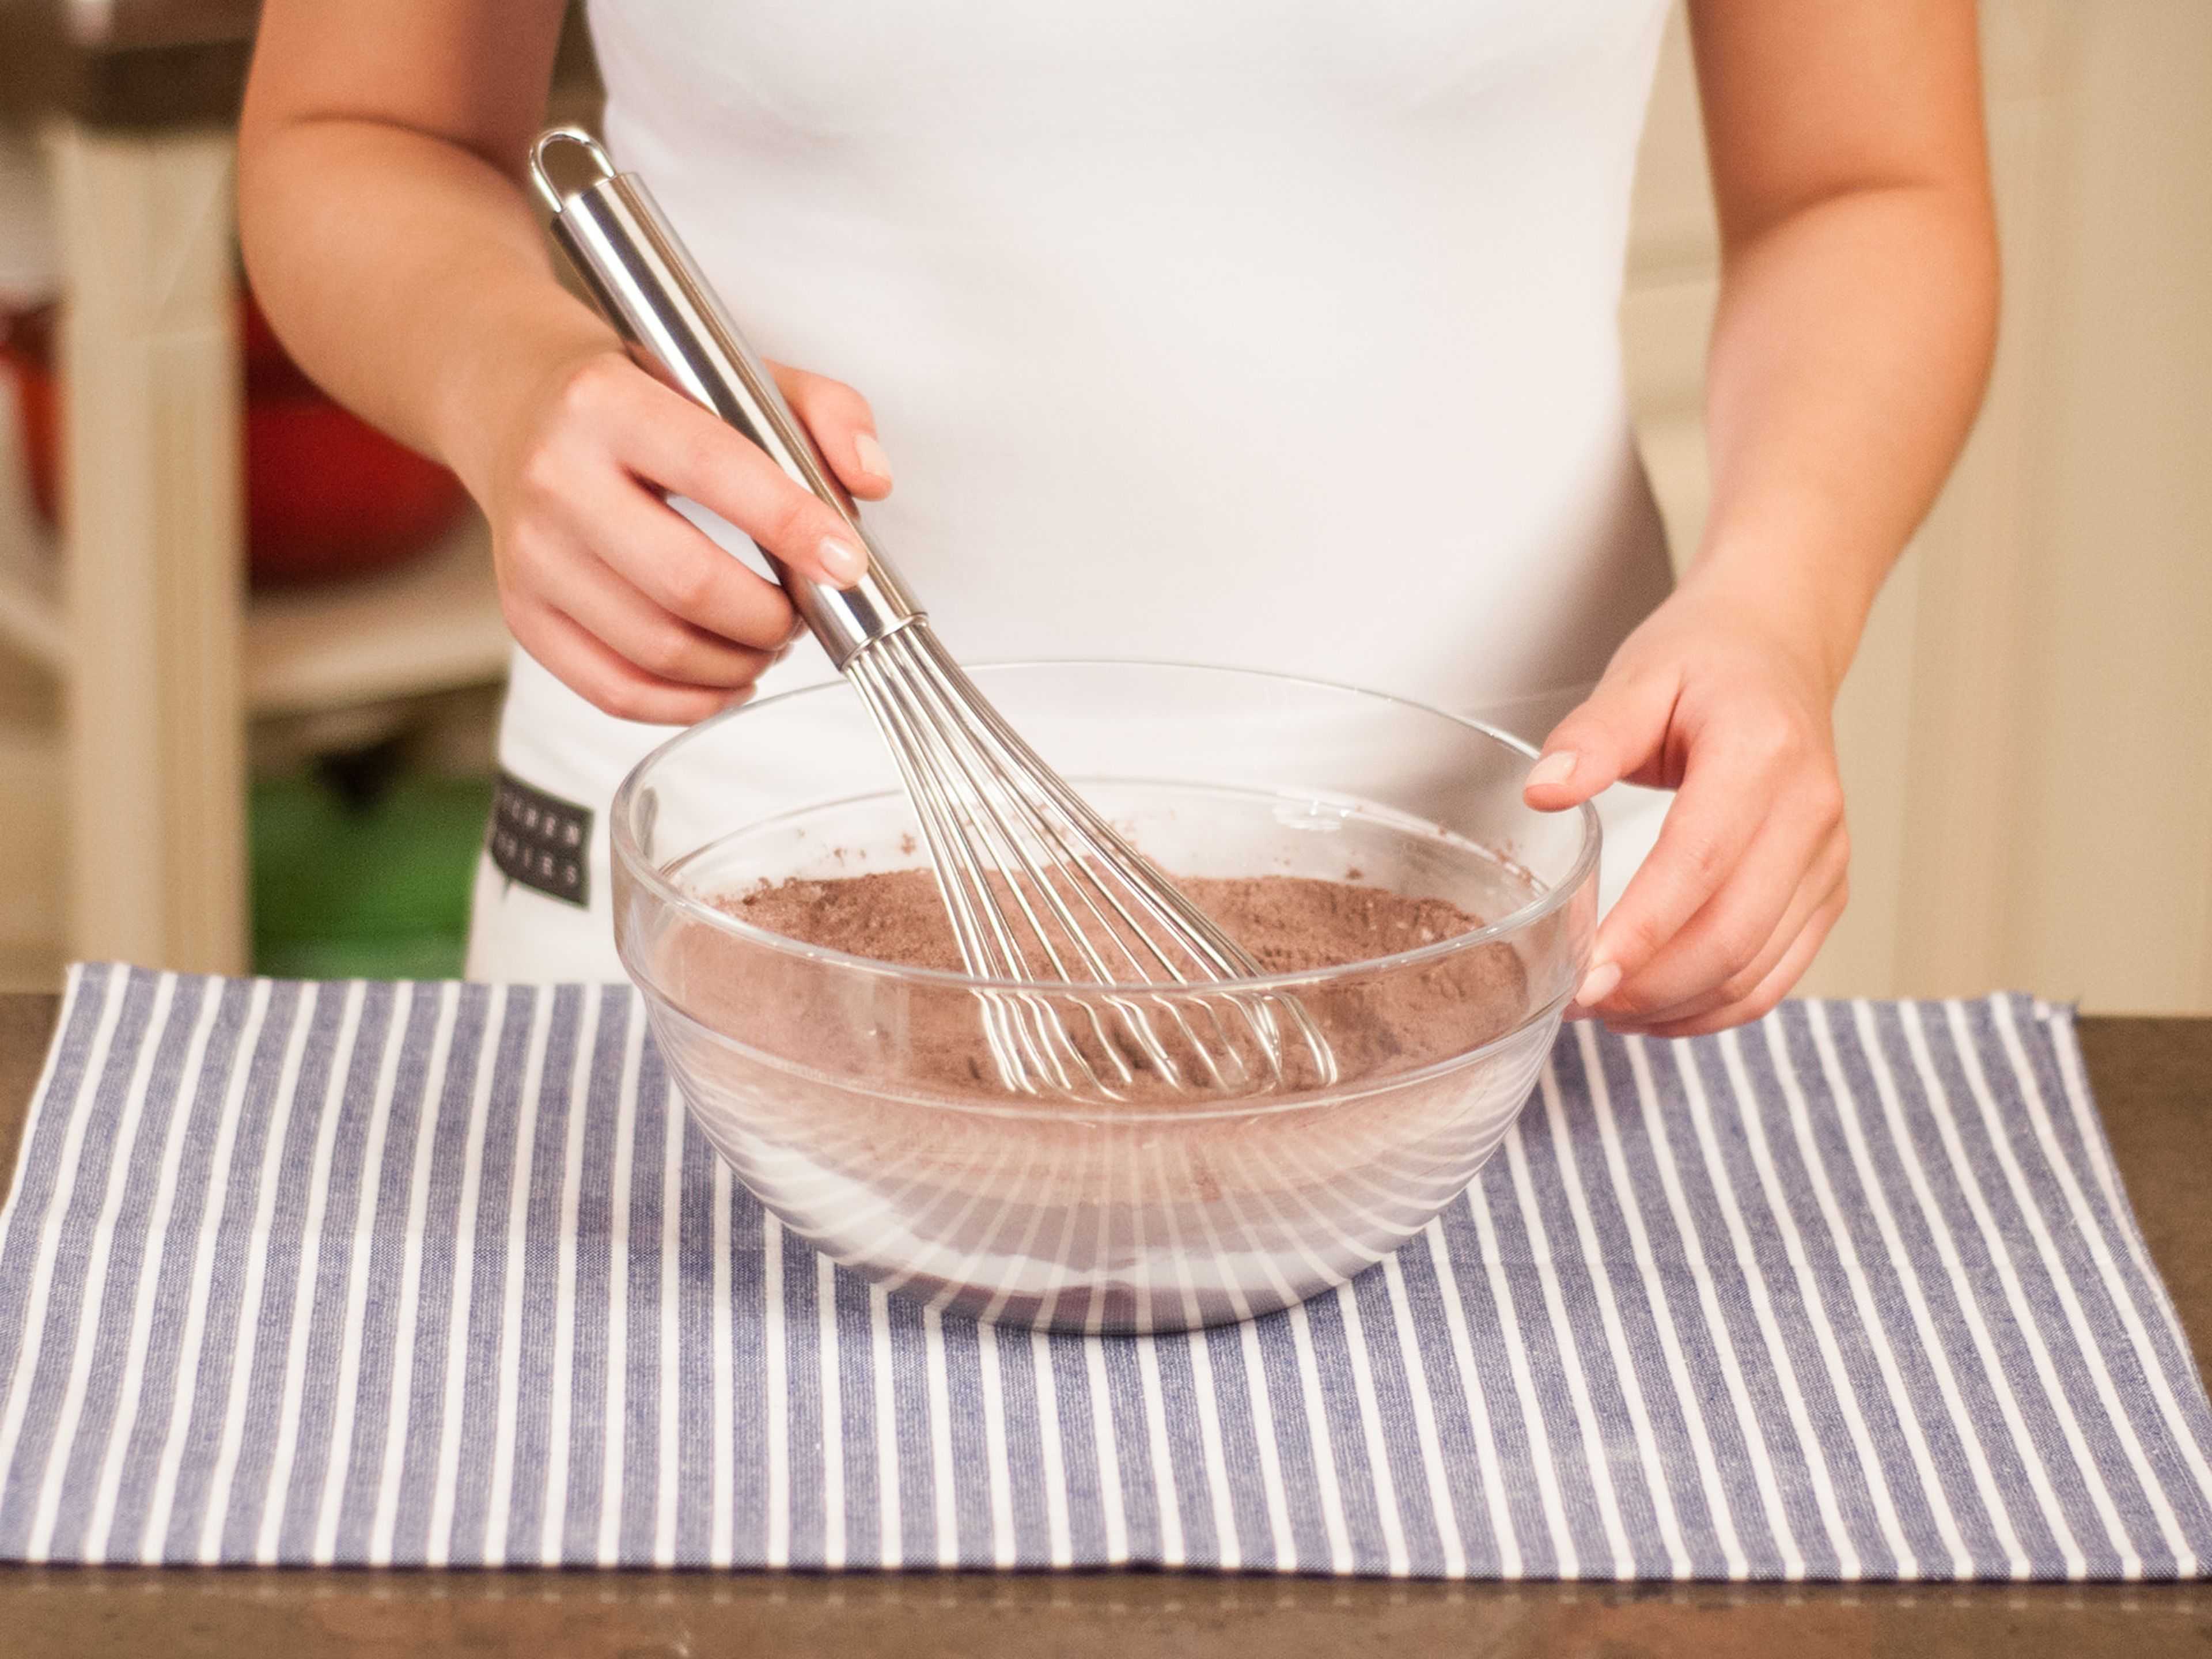 In a large bowl, whisk together cocoa powder, all-purpose flour, sugar, baking powder, and seeds from the vanilla bean.